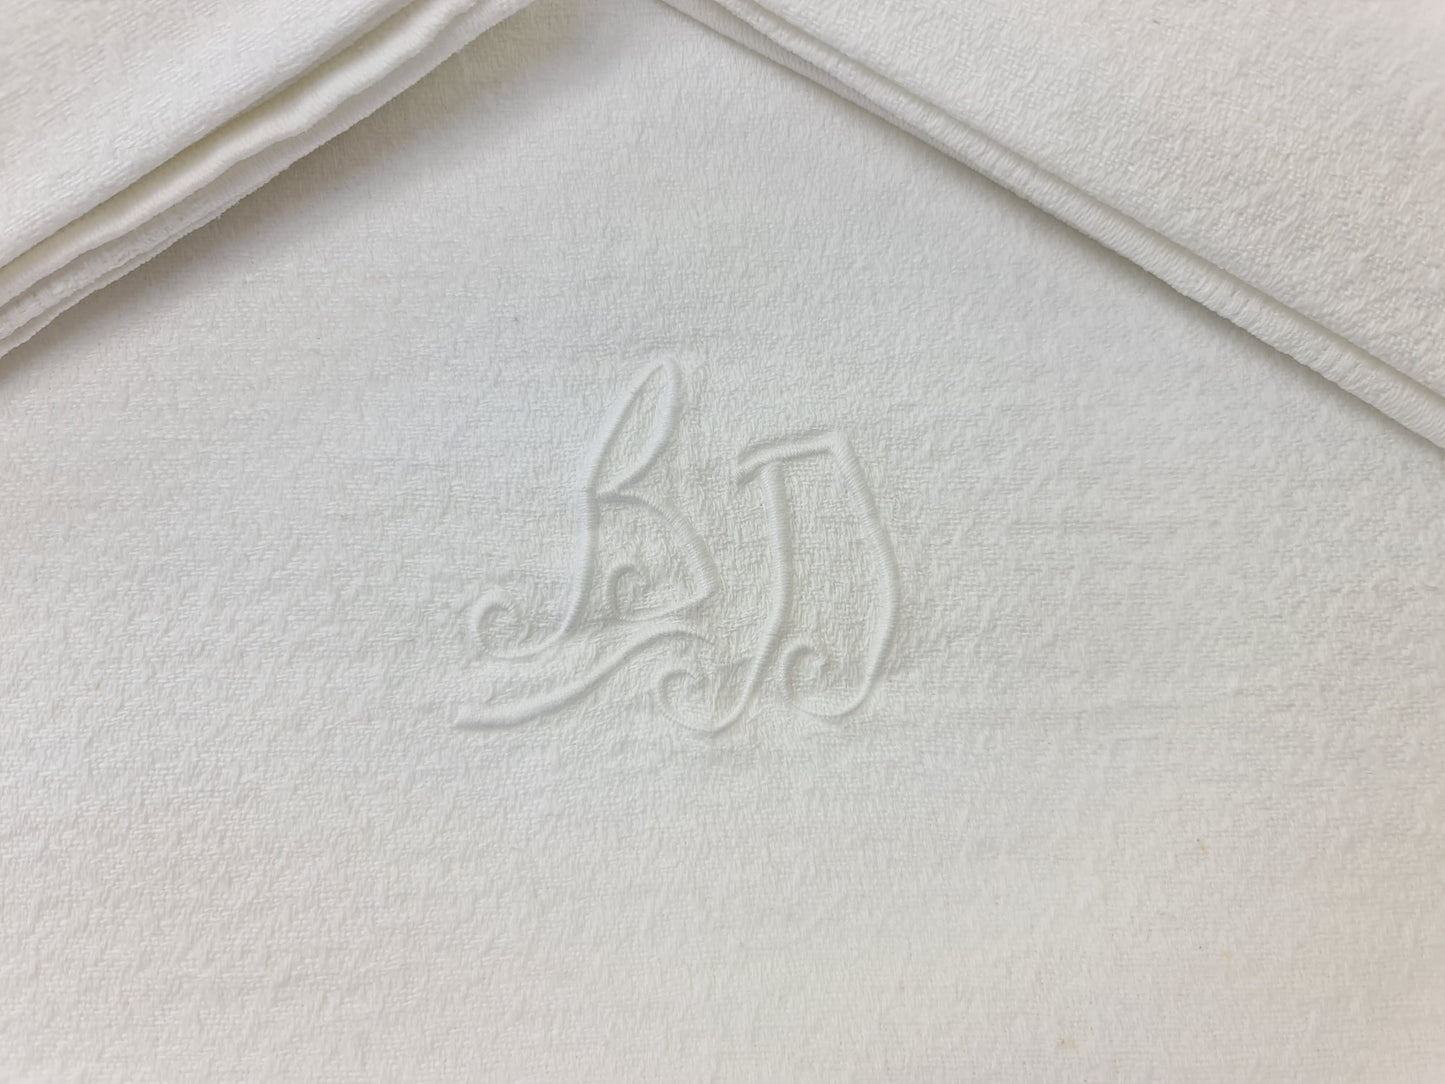 SET 12 BD or BJJ monogram napkins + tablecloth Rectangular French Dining Kitchen Trousseau White Cotton Wedding Party Ideal gift Immaculate